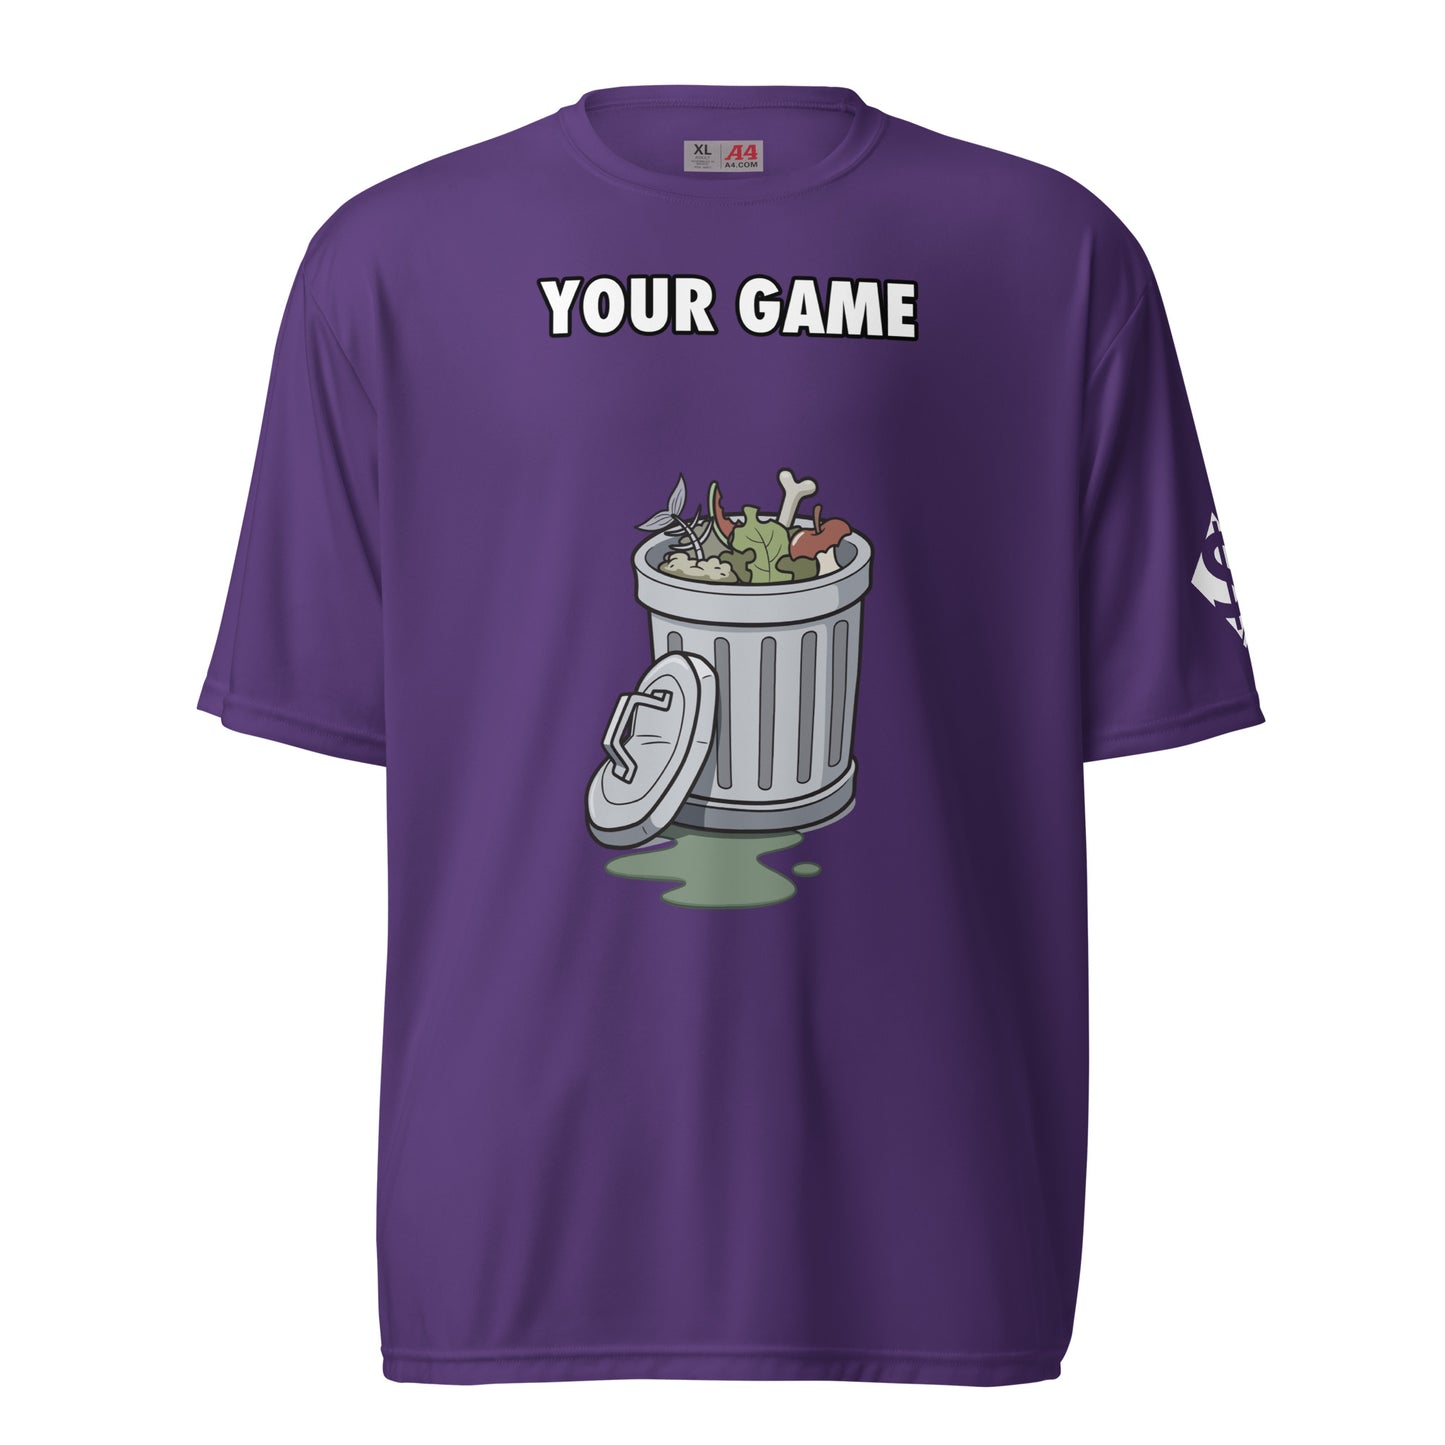 Your Game Is Trash - Premium Tee